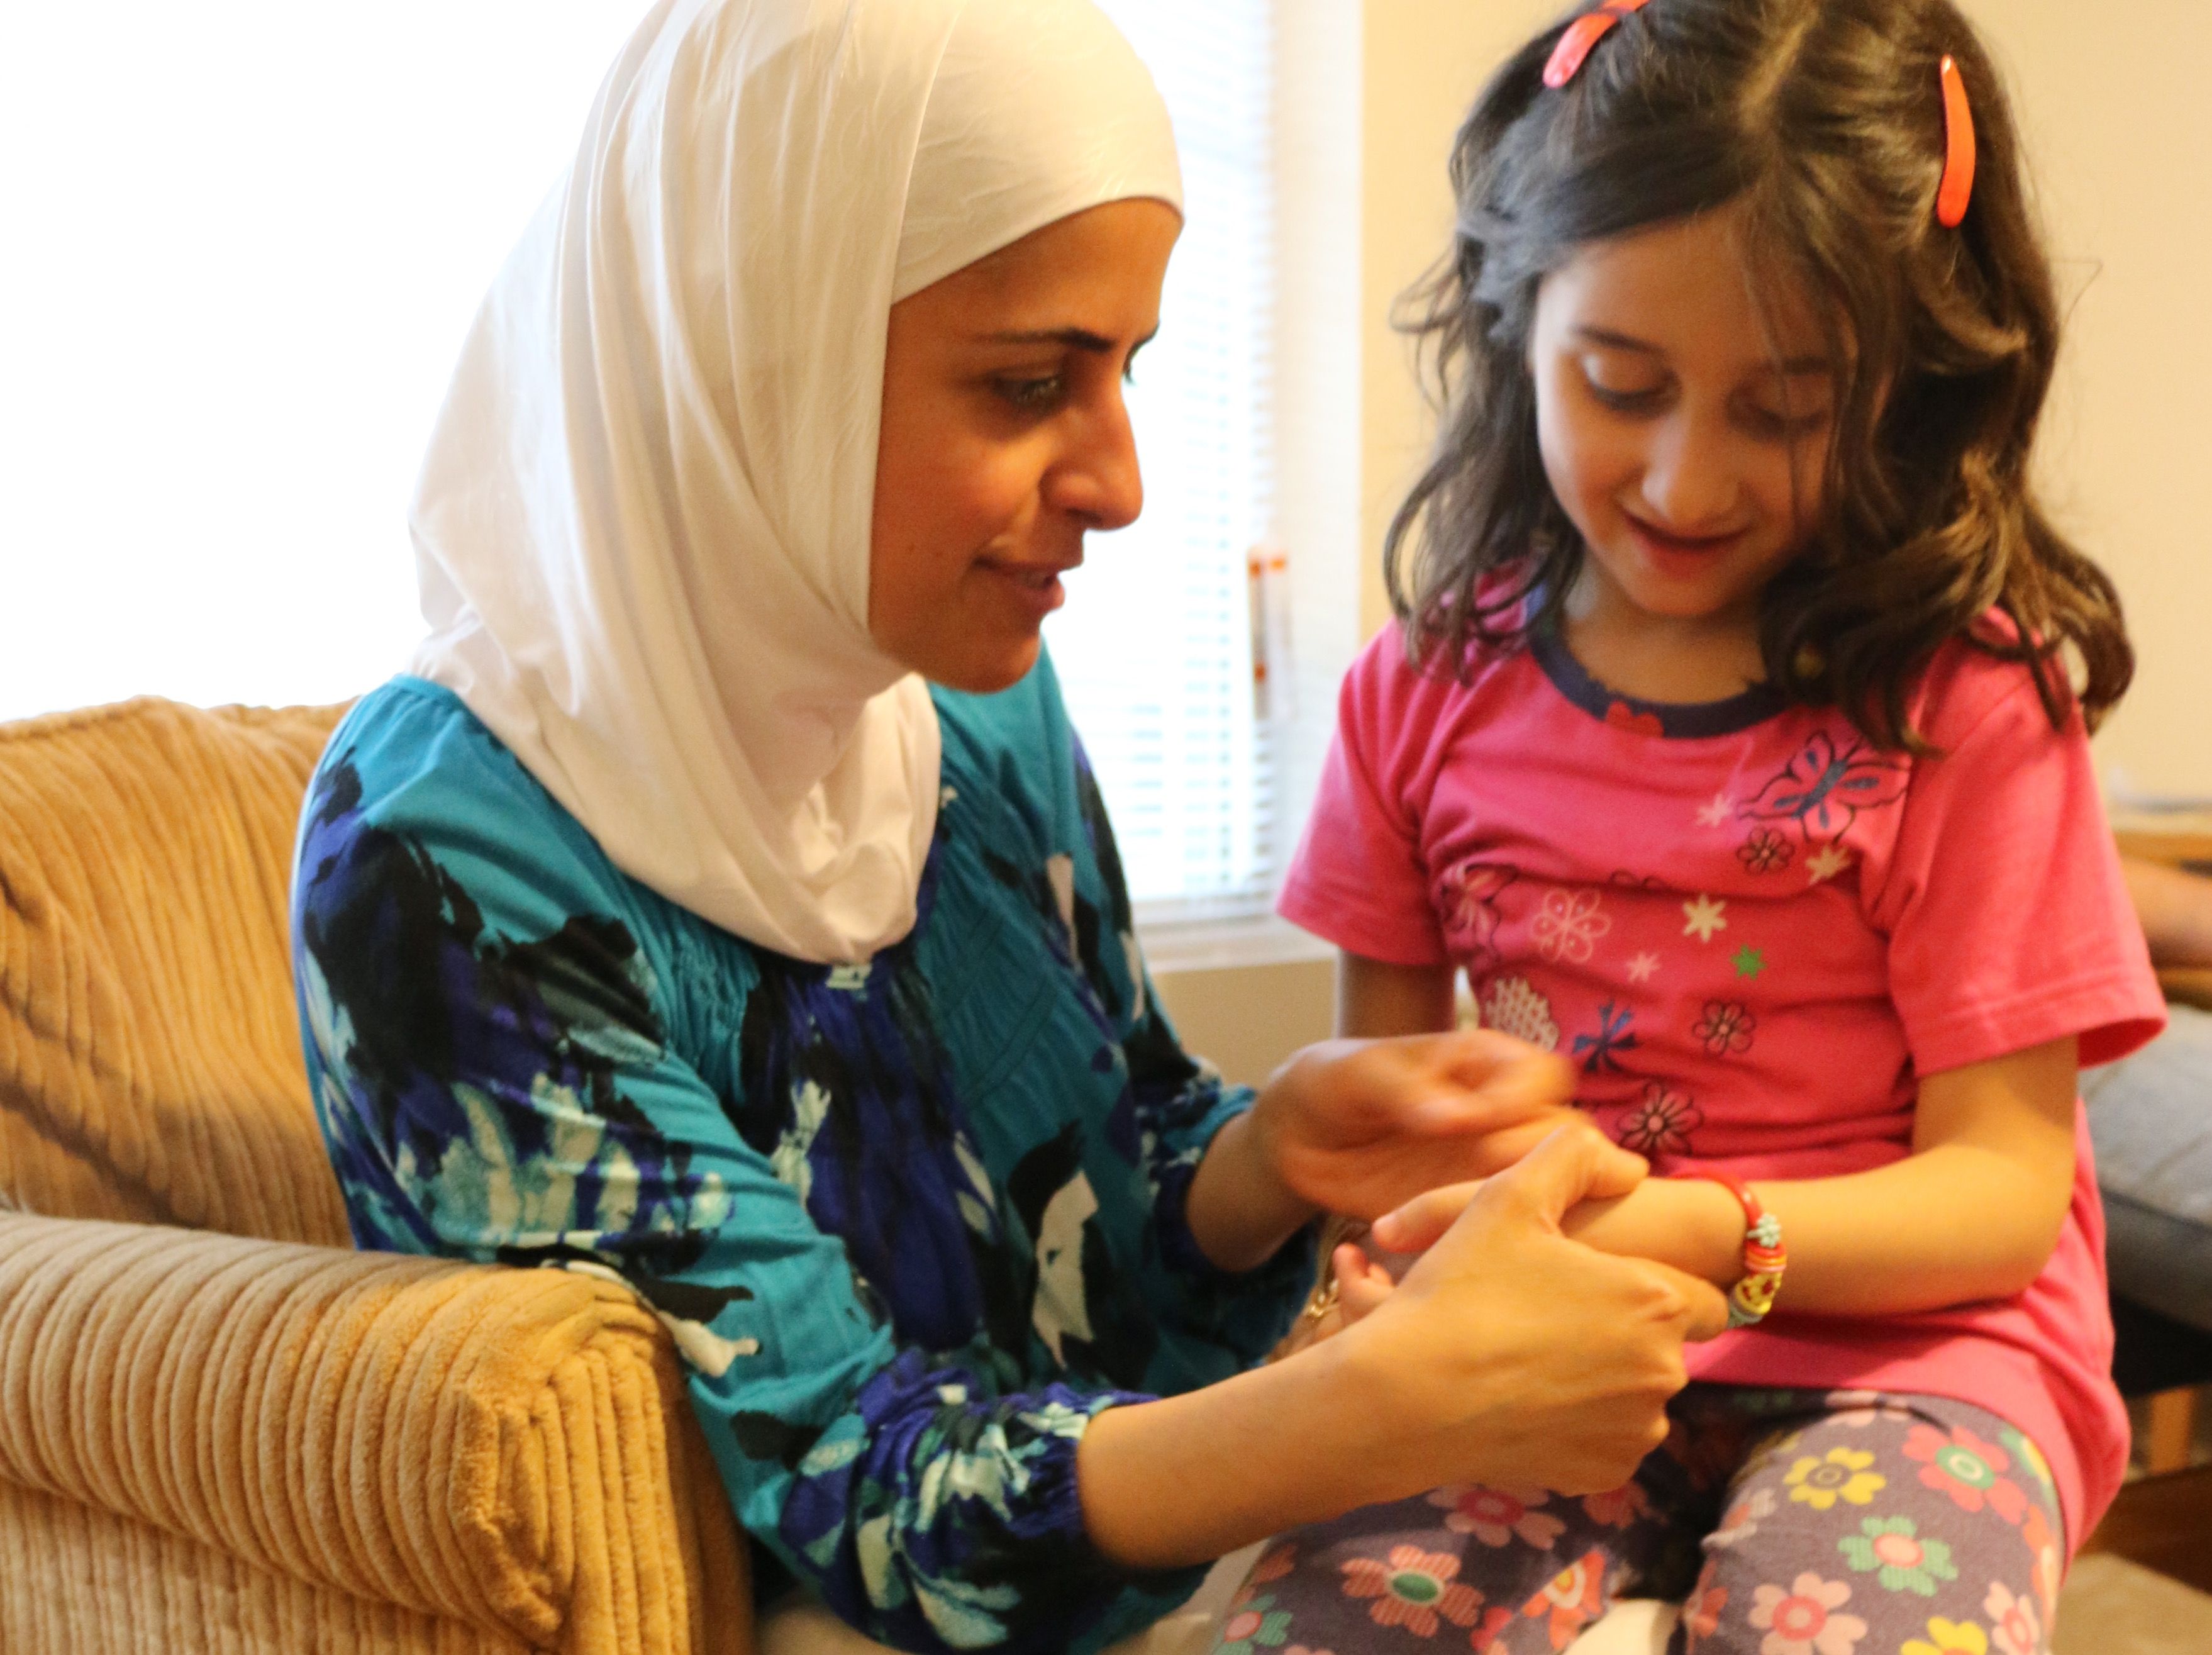 The settlement agency in charge of Ghazweh's family identified four Syrian families previously living around Des Moines. Ghinwa Alameen, a Syrian professor of linguistics, picks up Ghazweh's daughter Hala when she visits to welcome the newcomers.